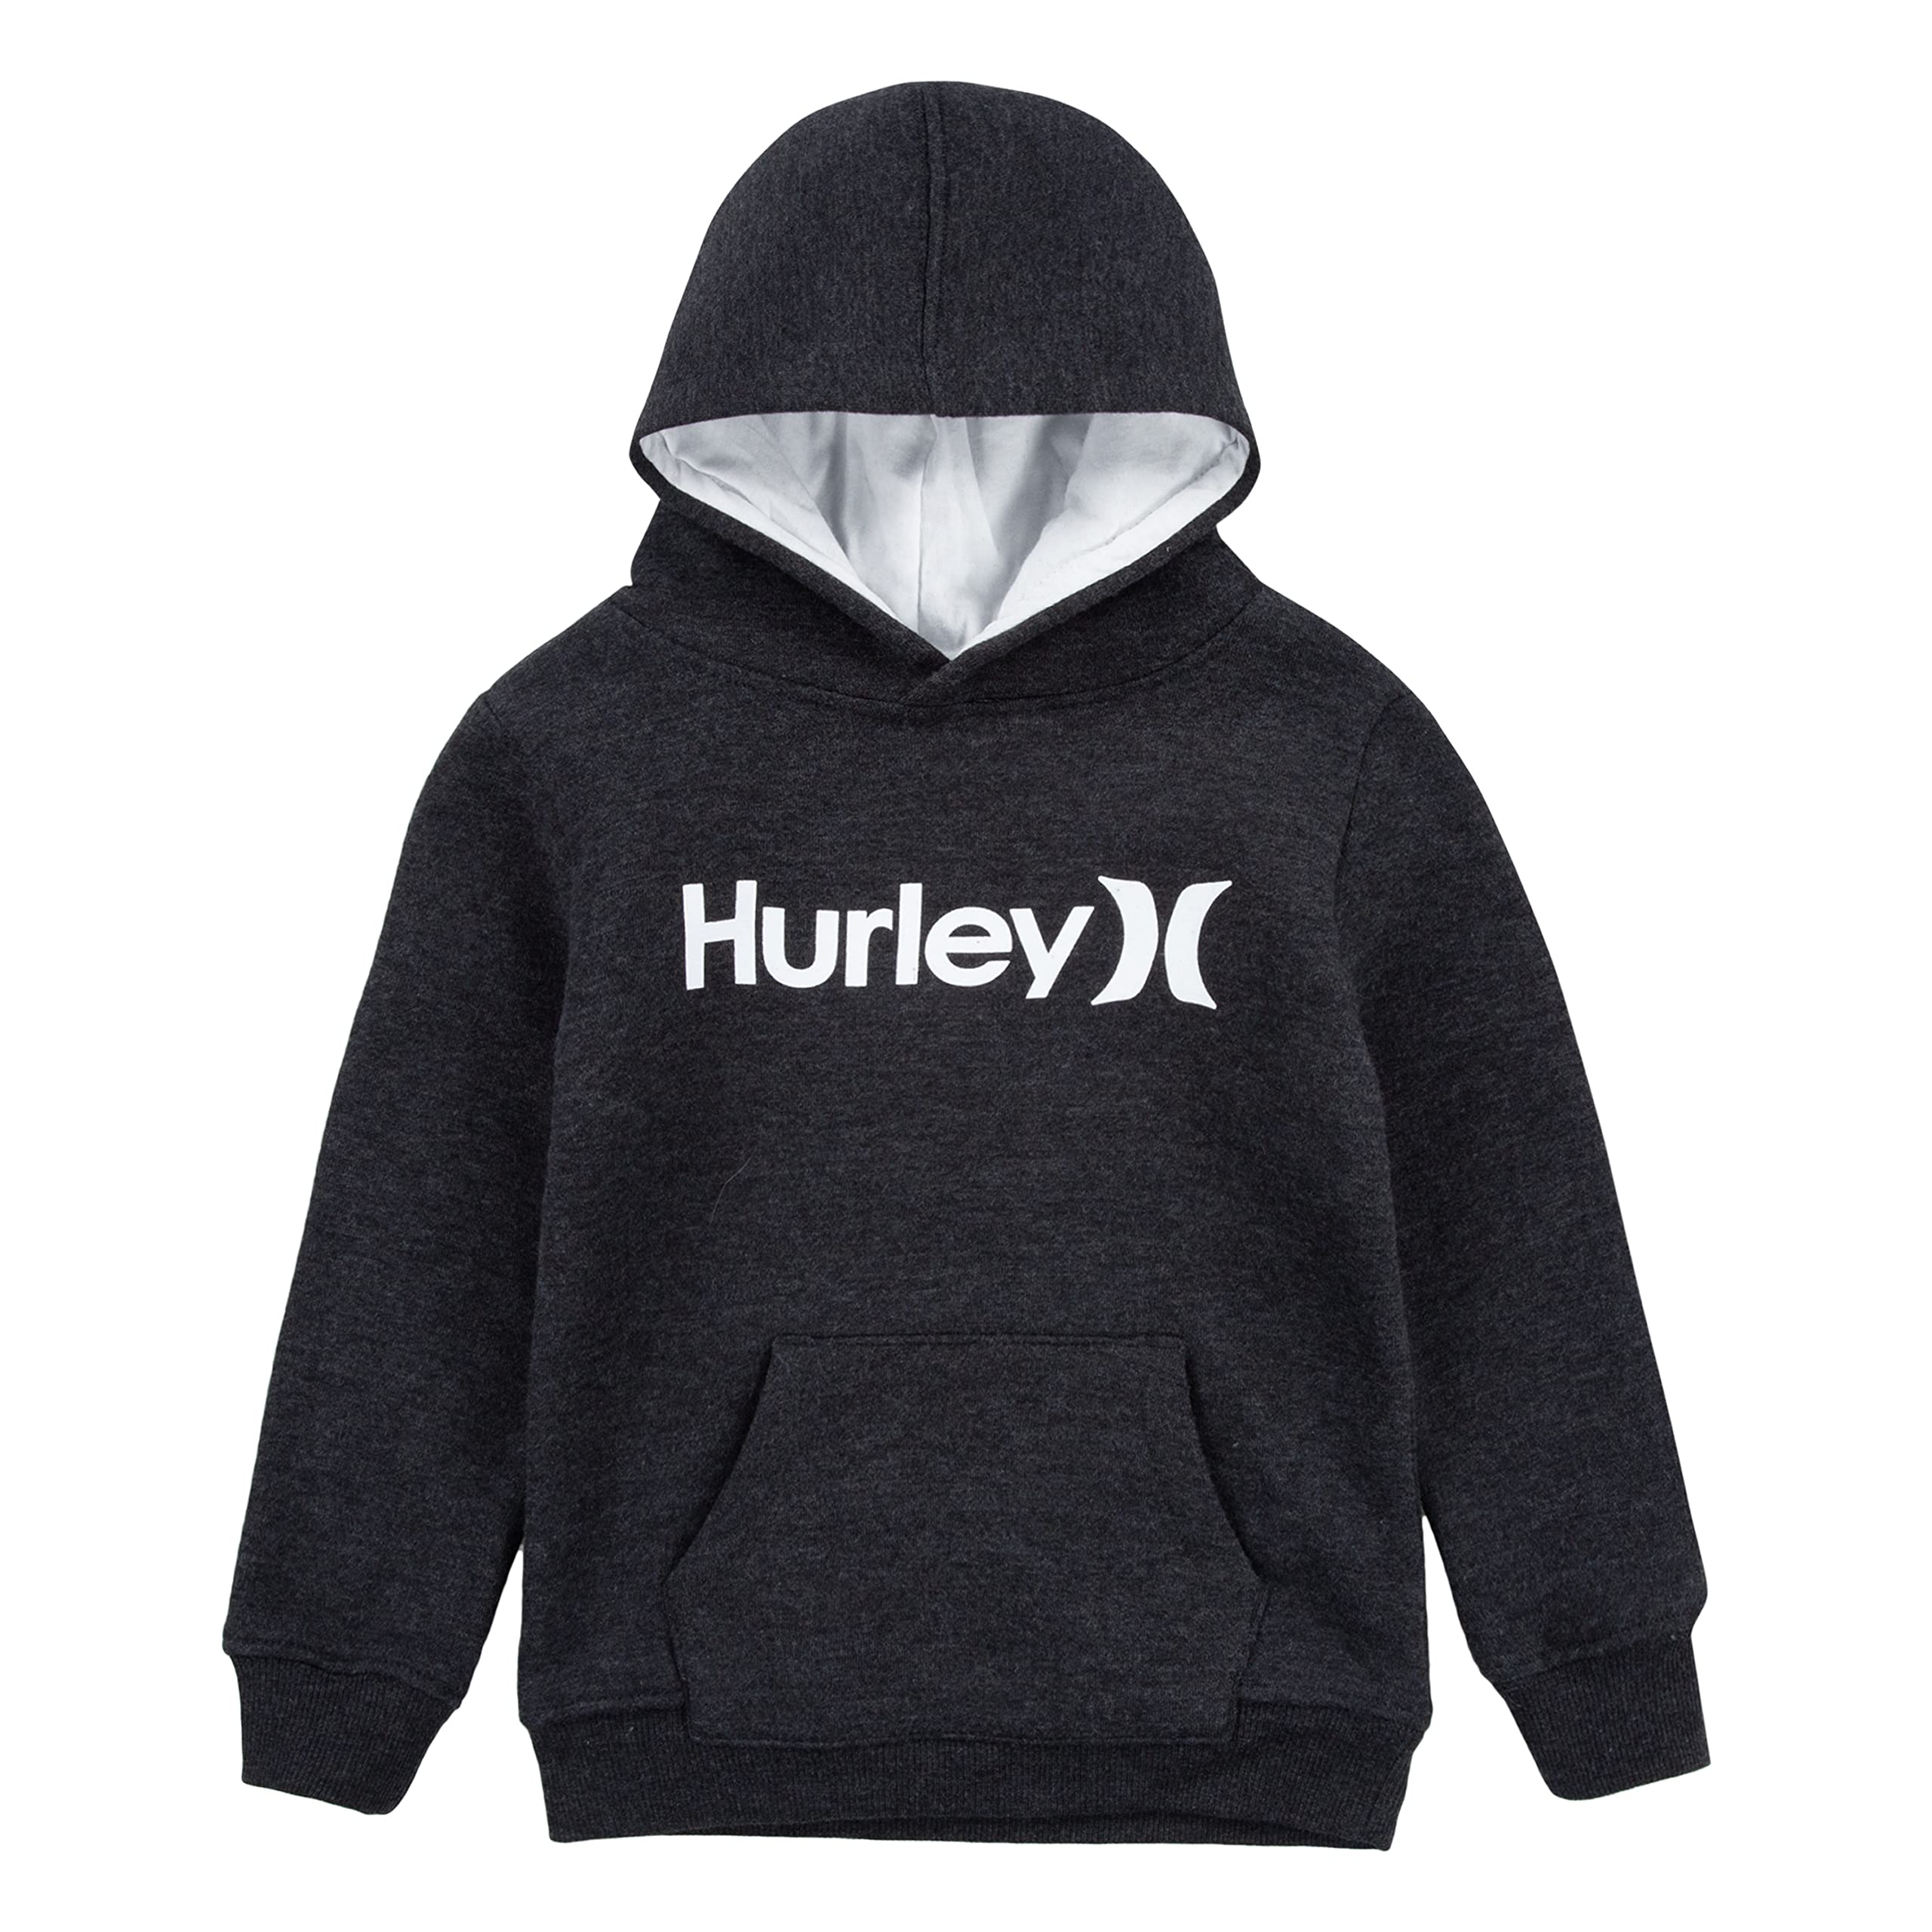 Hurley Boys' One & Only Pullover Hoodie (Black Heather; Various Sizes) $14 + Free Shipping w/ Prime or Orders $25+